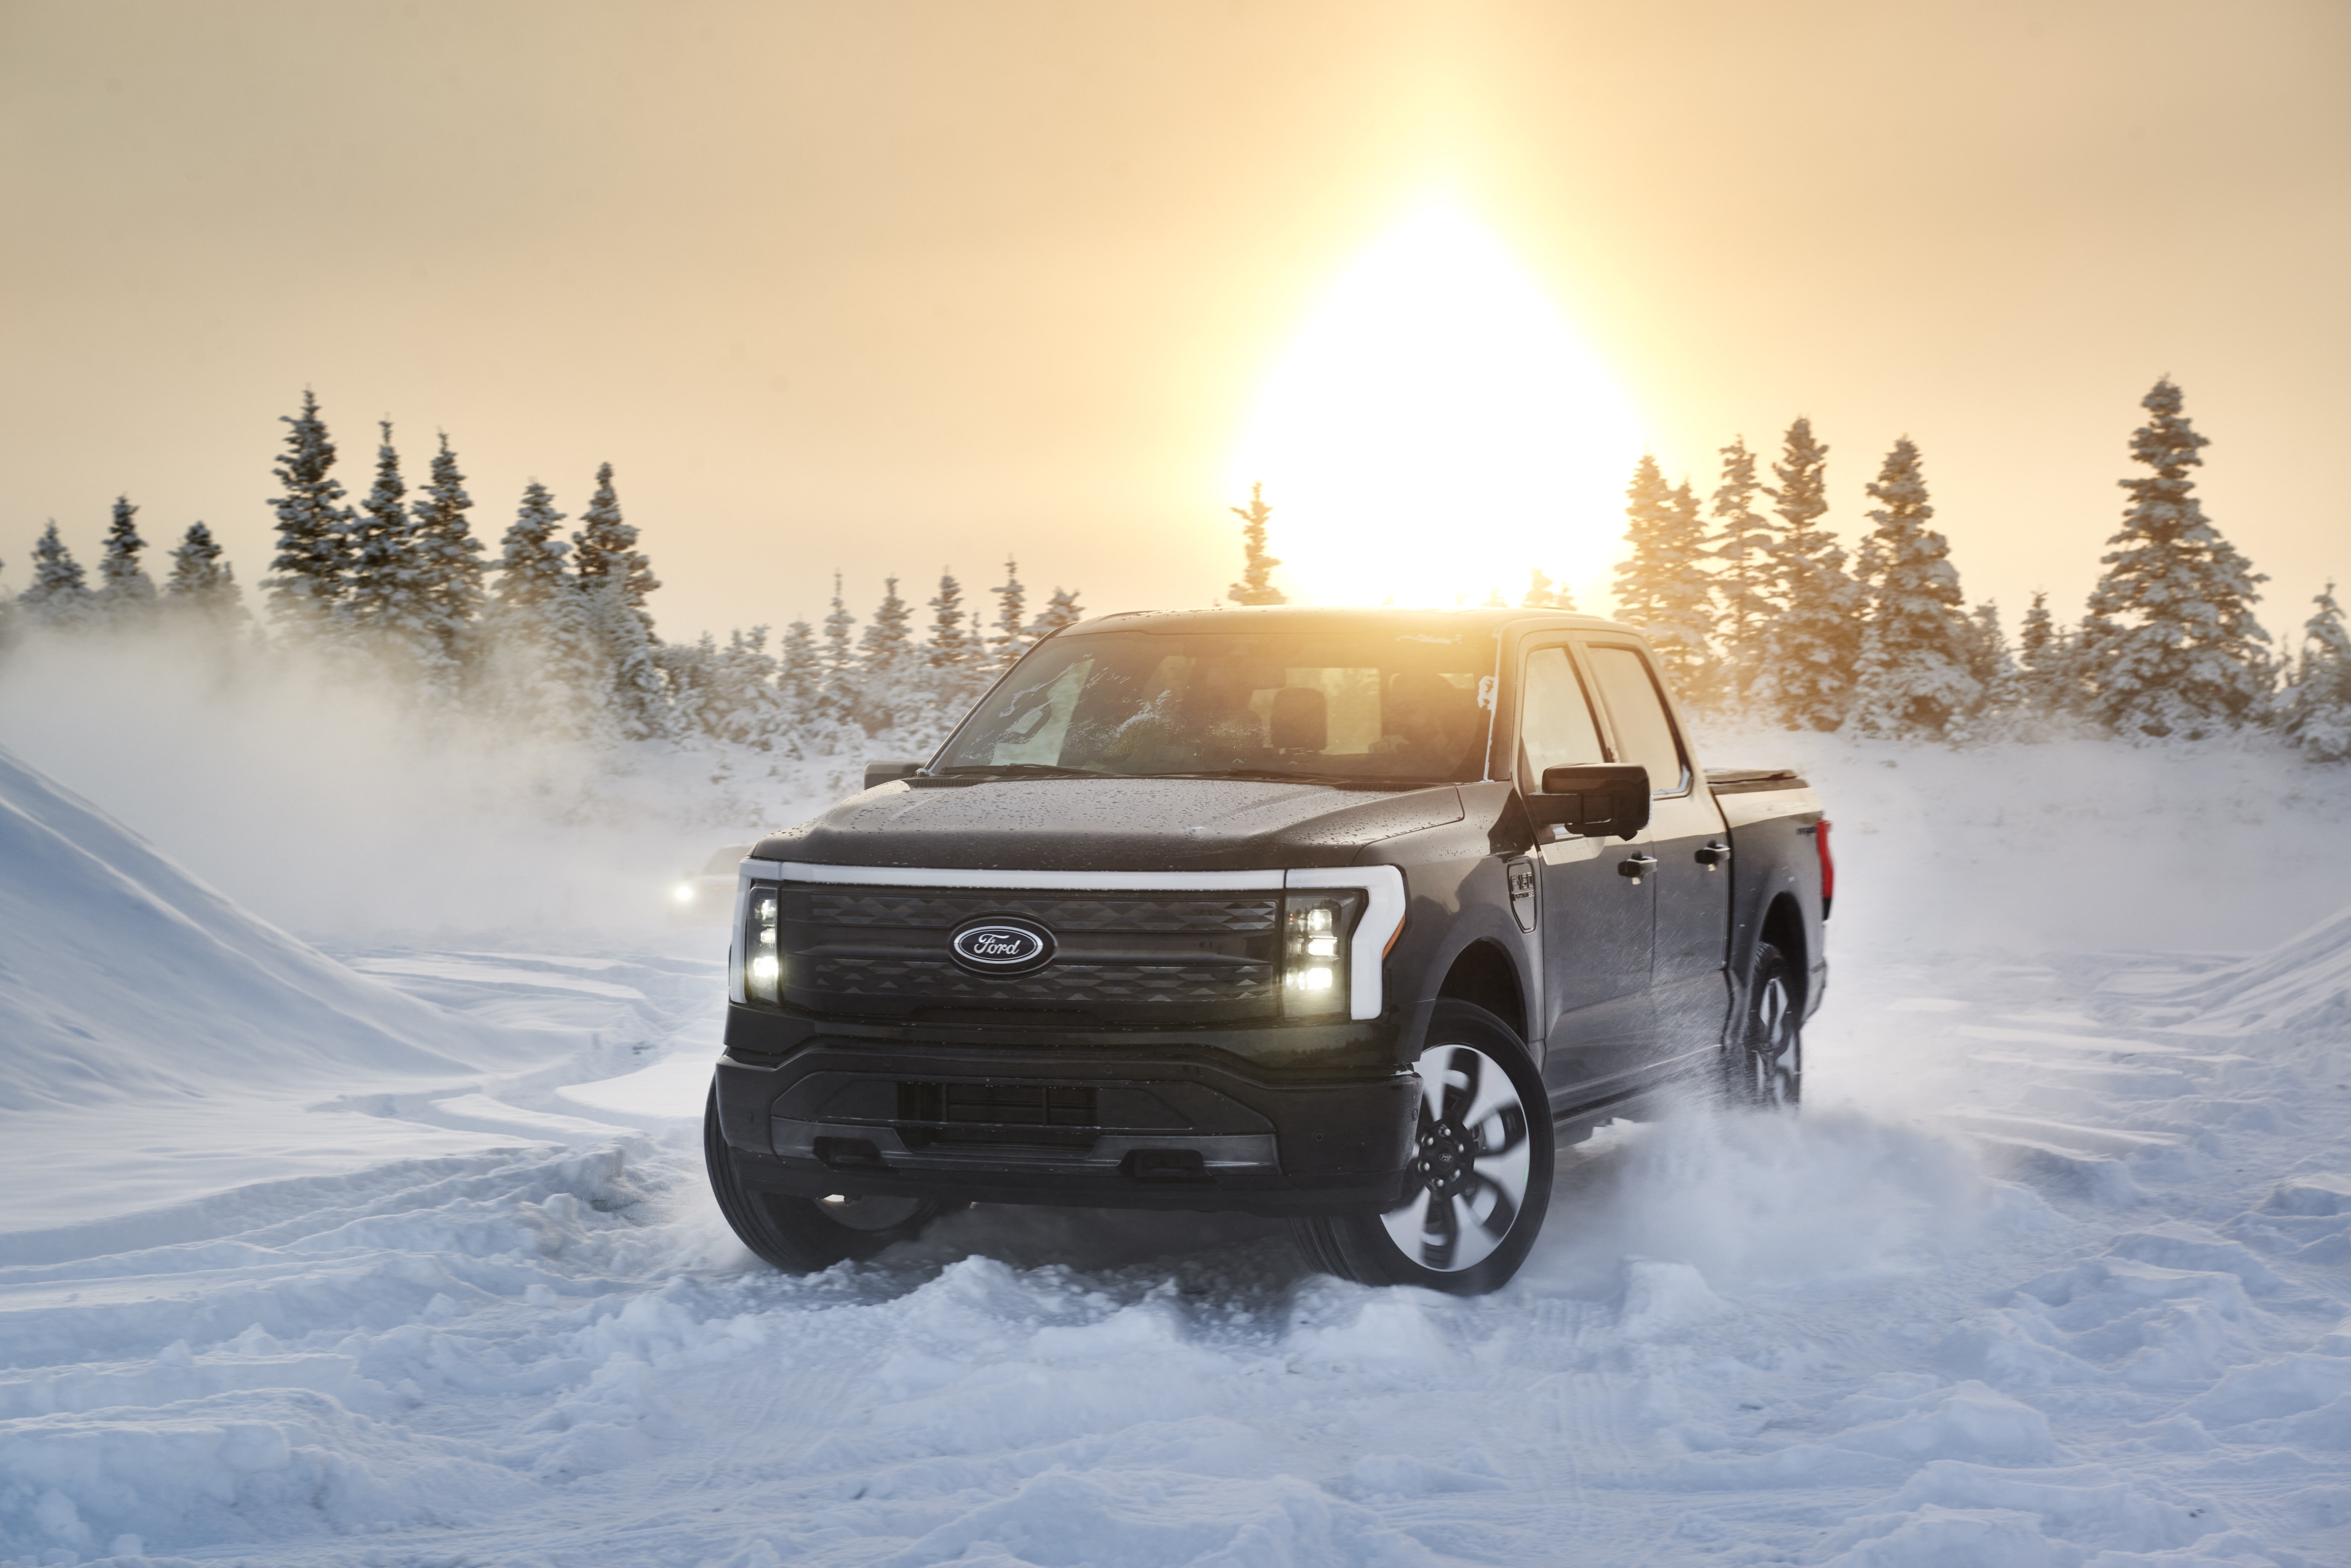 Ford’s F-150 Lightning Tested in Extreme Winter Weather